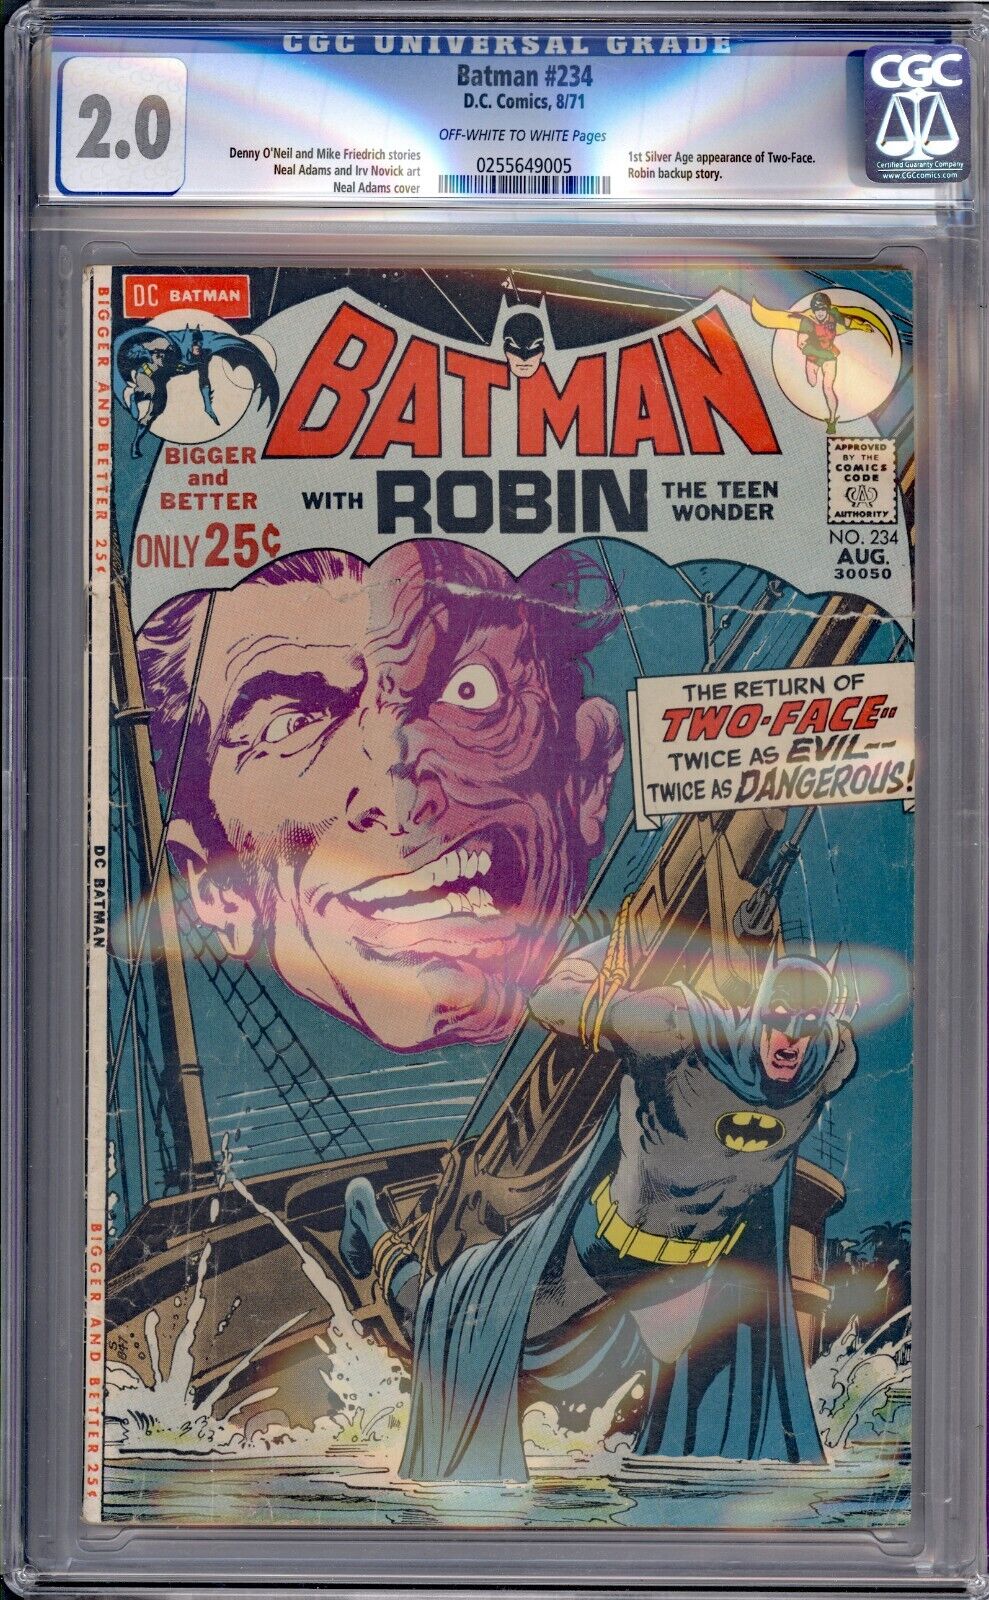 BATMAN  234  CGC 2.0 - 0255649005 - Affordable 1st Silver Age Two-Face